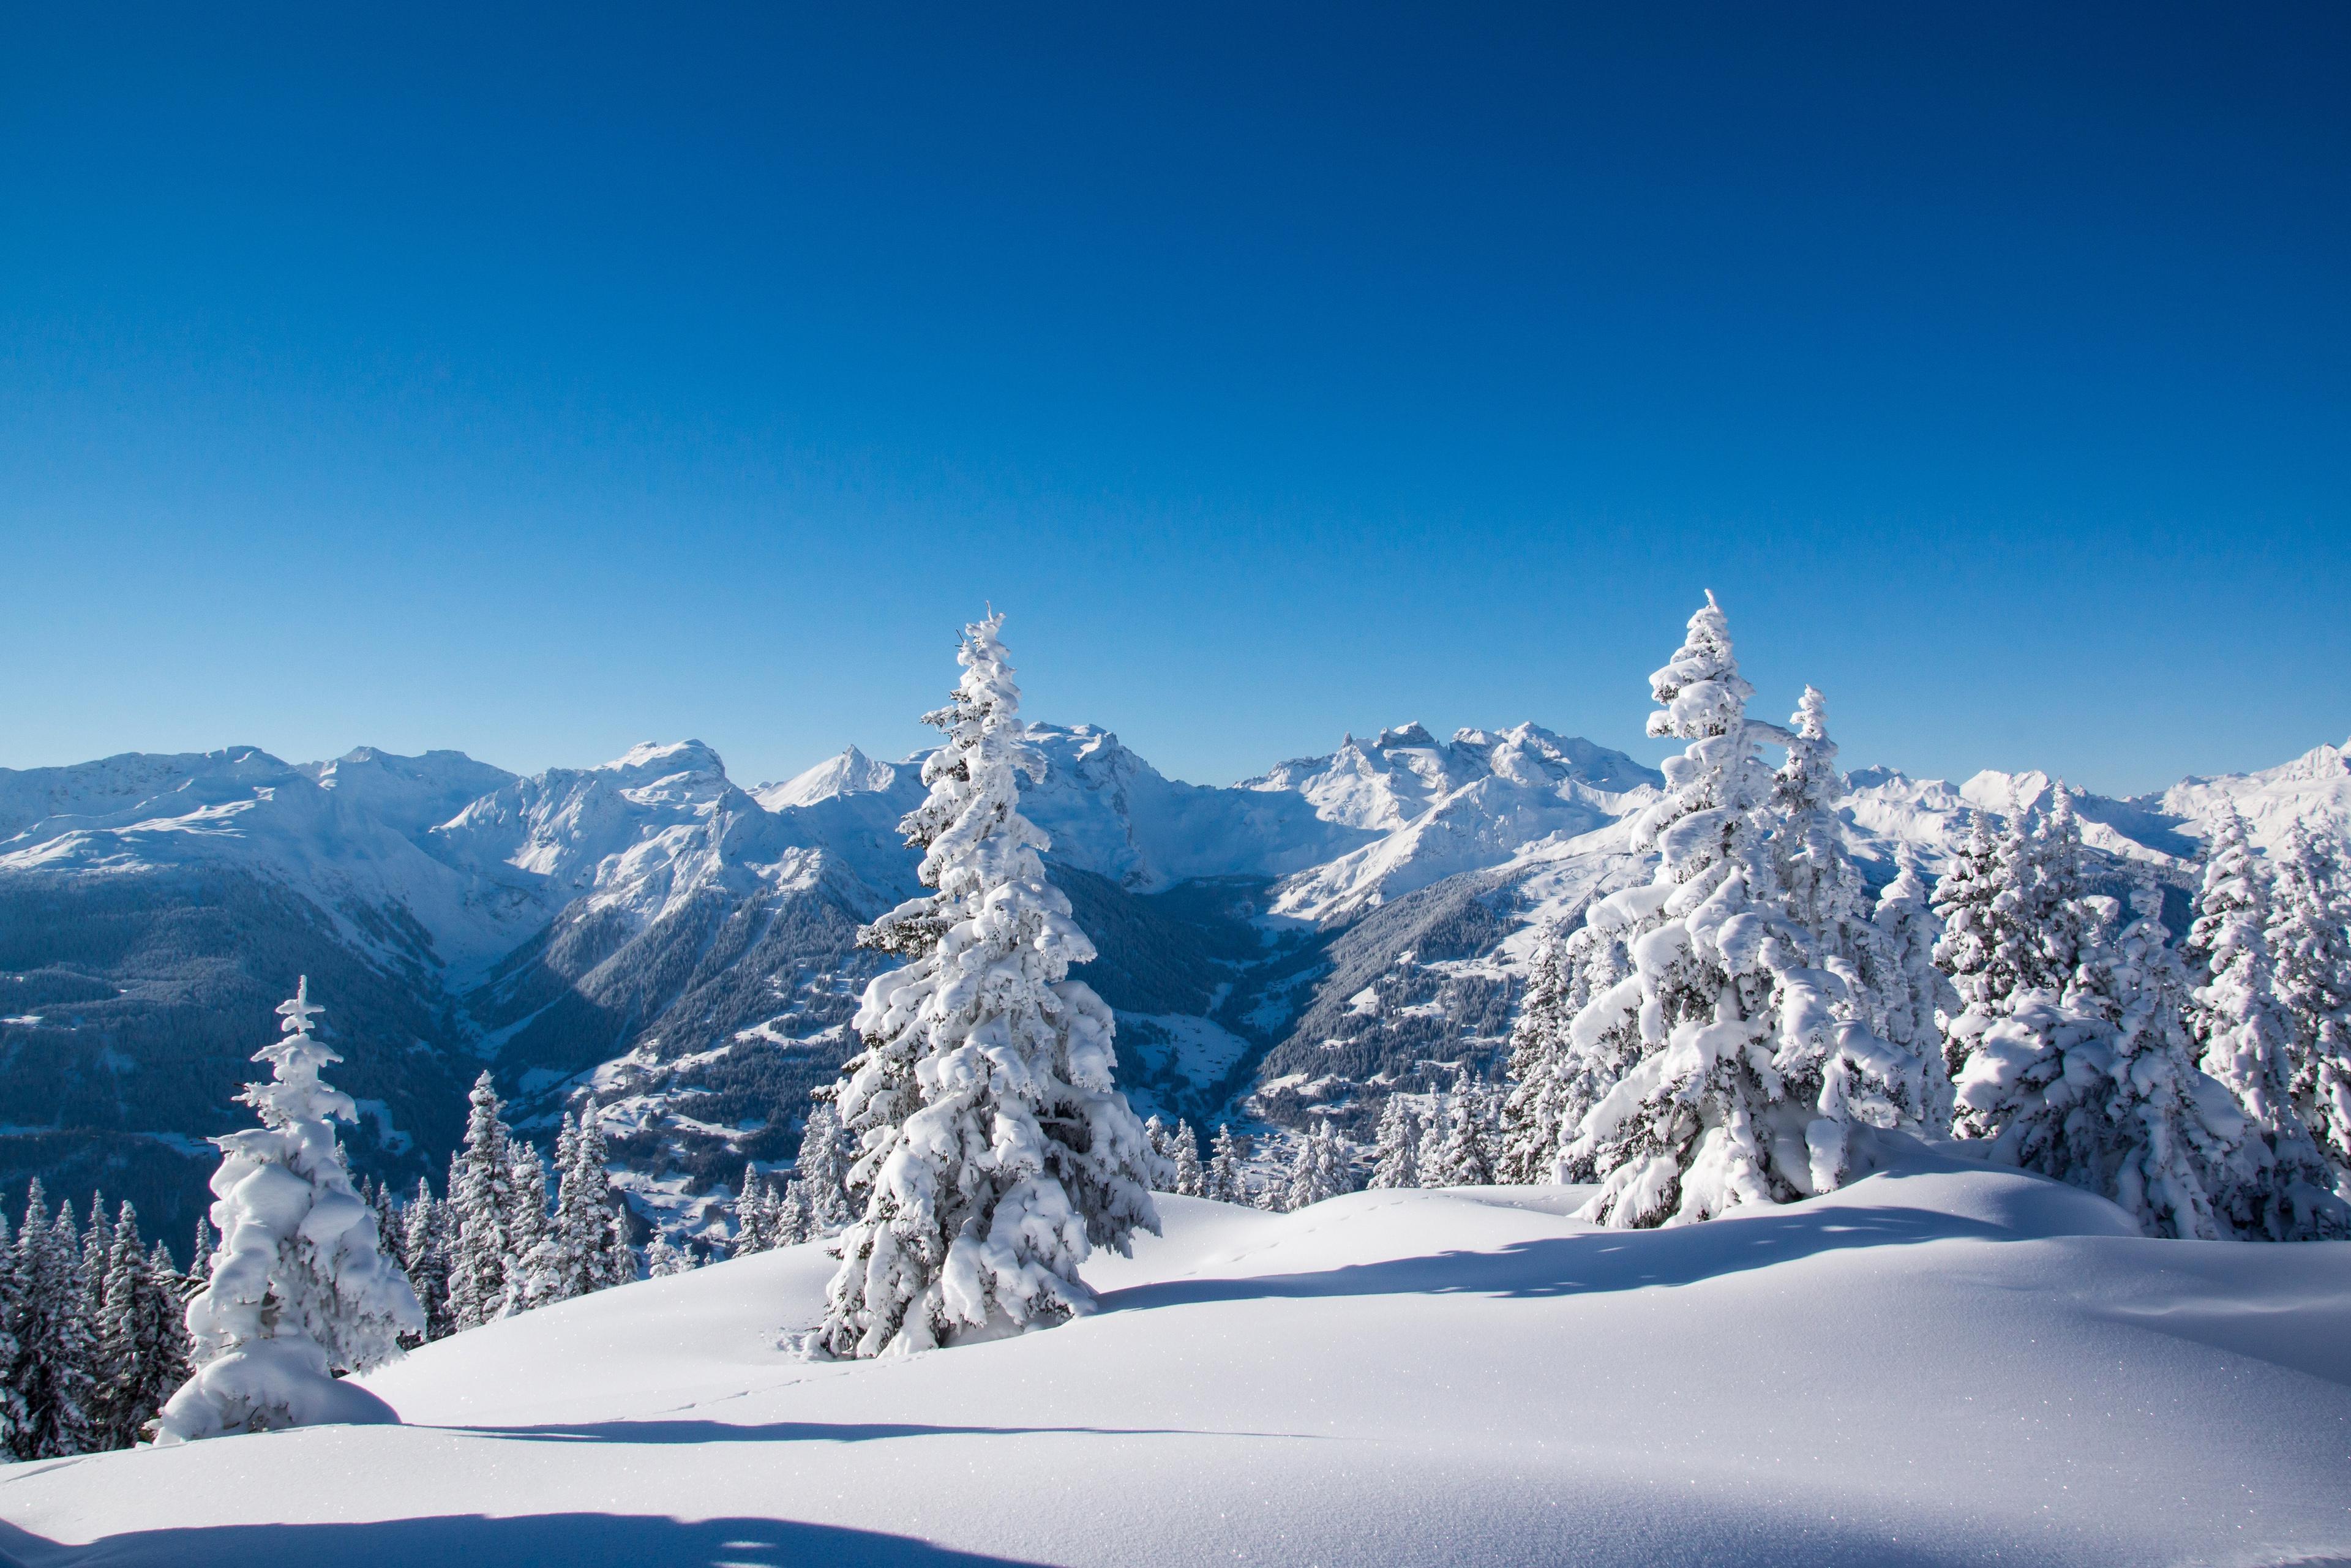 Mountains In Winter Snow Wallpapers